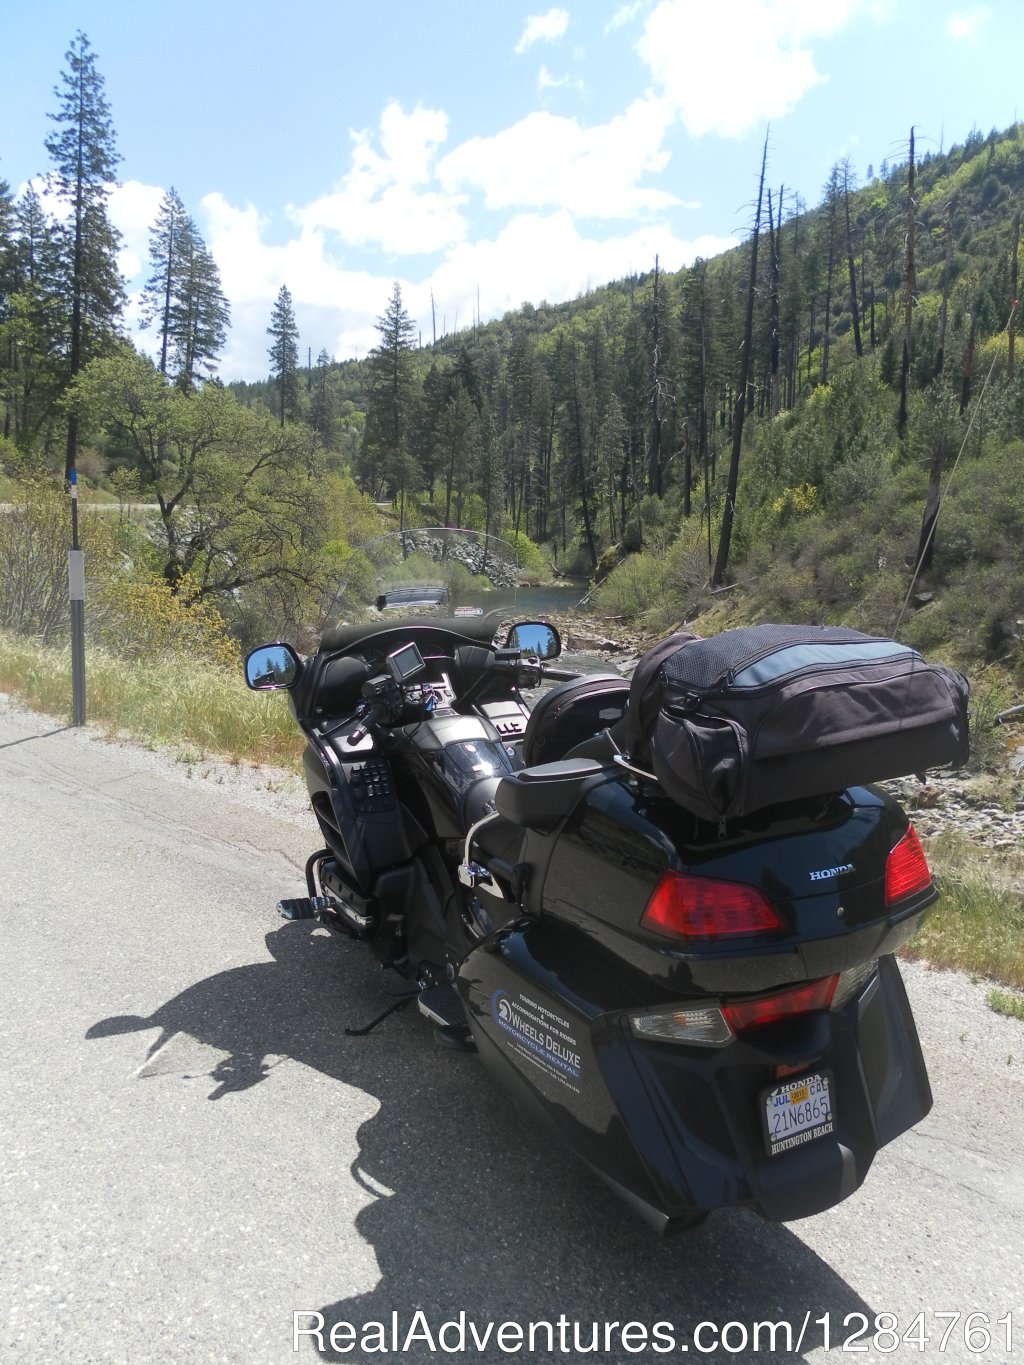 Riding through Napa Valley is just special | Touring Motorcycles Rental And Accommodations | Image #14/20 | 